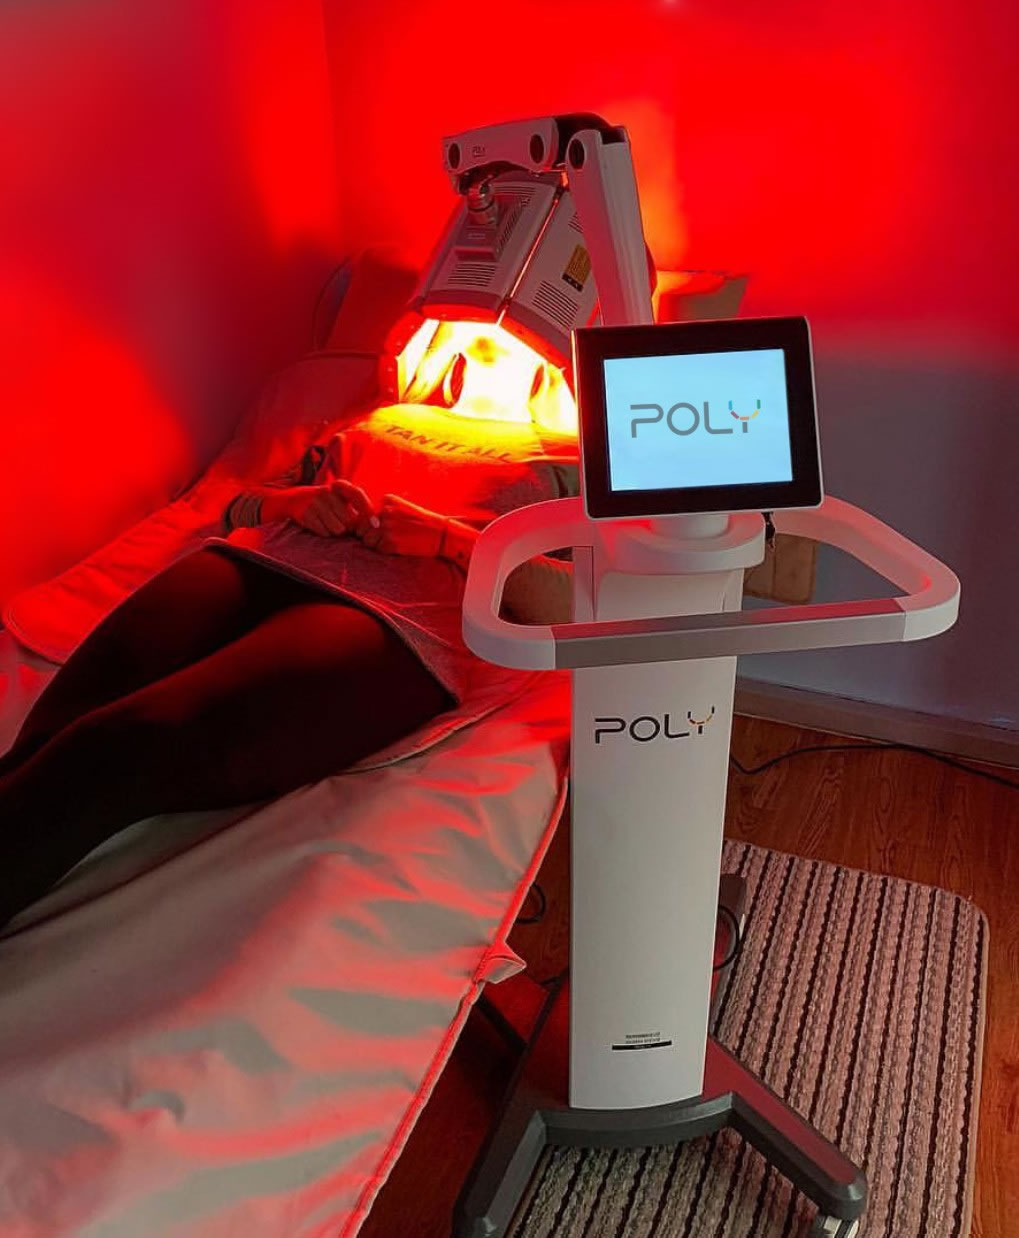 POLY, short for Polychromatic Light Therapy System, is the newest innovation in LED Light Therapy